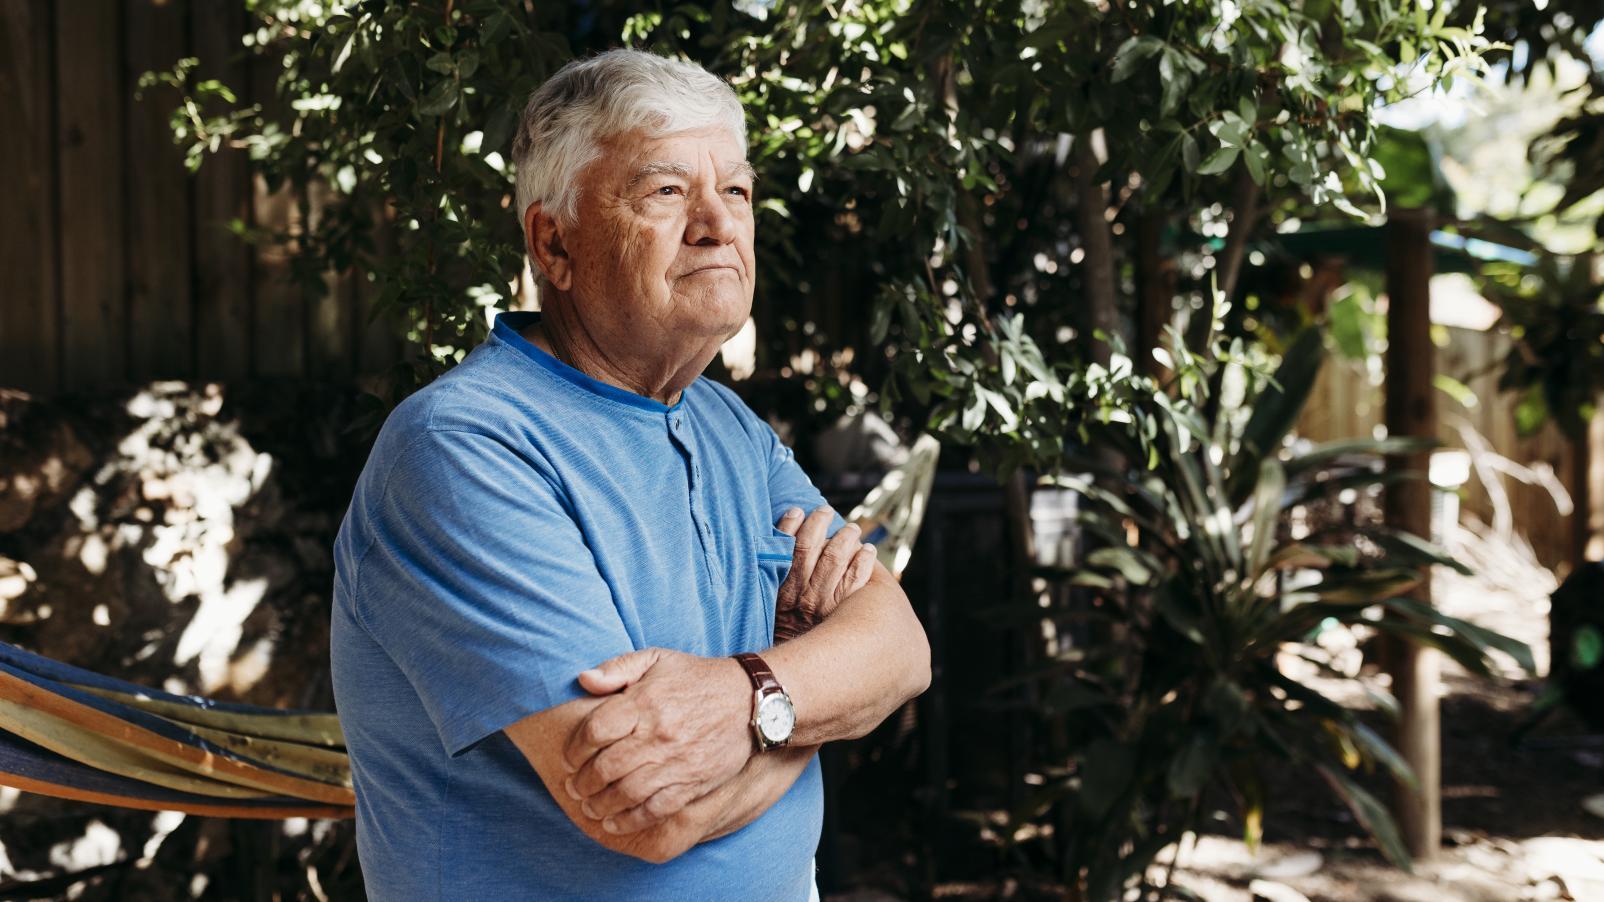 Image of a man in a garden wearing a blue shirt looking into the distance 